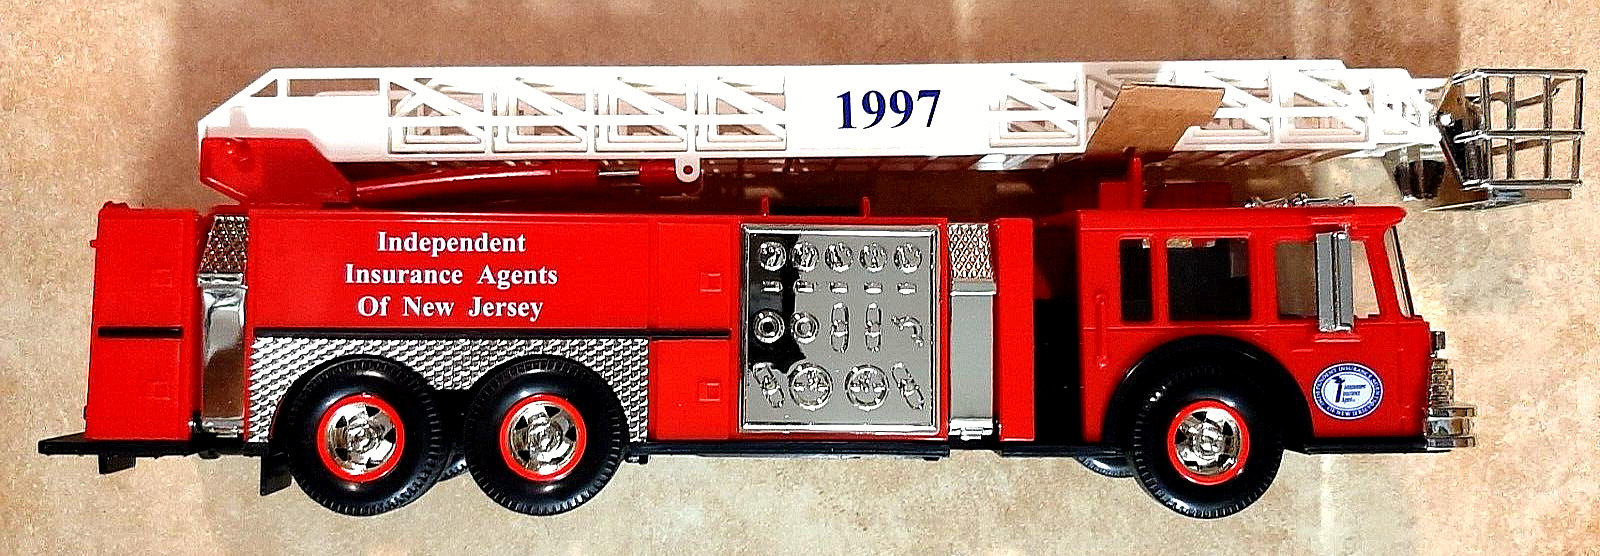 1997 Aerial Tower Limited Fire Truck Independent Insurance of New Jersey in box